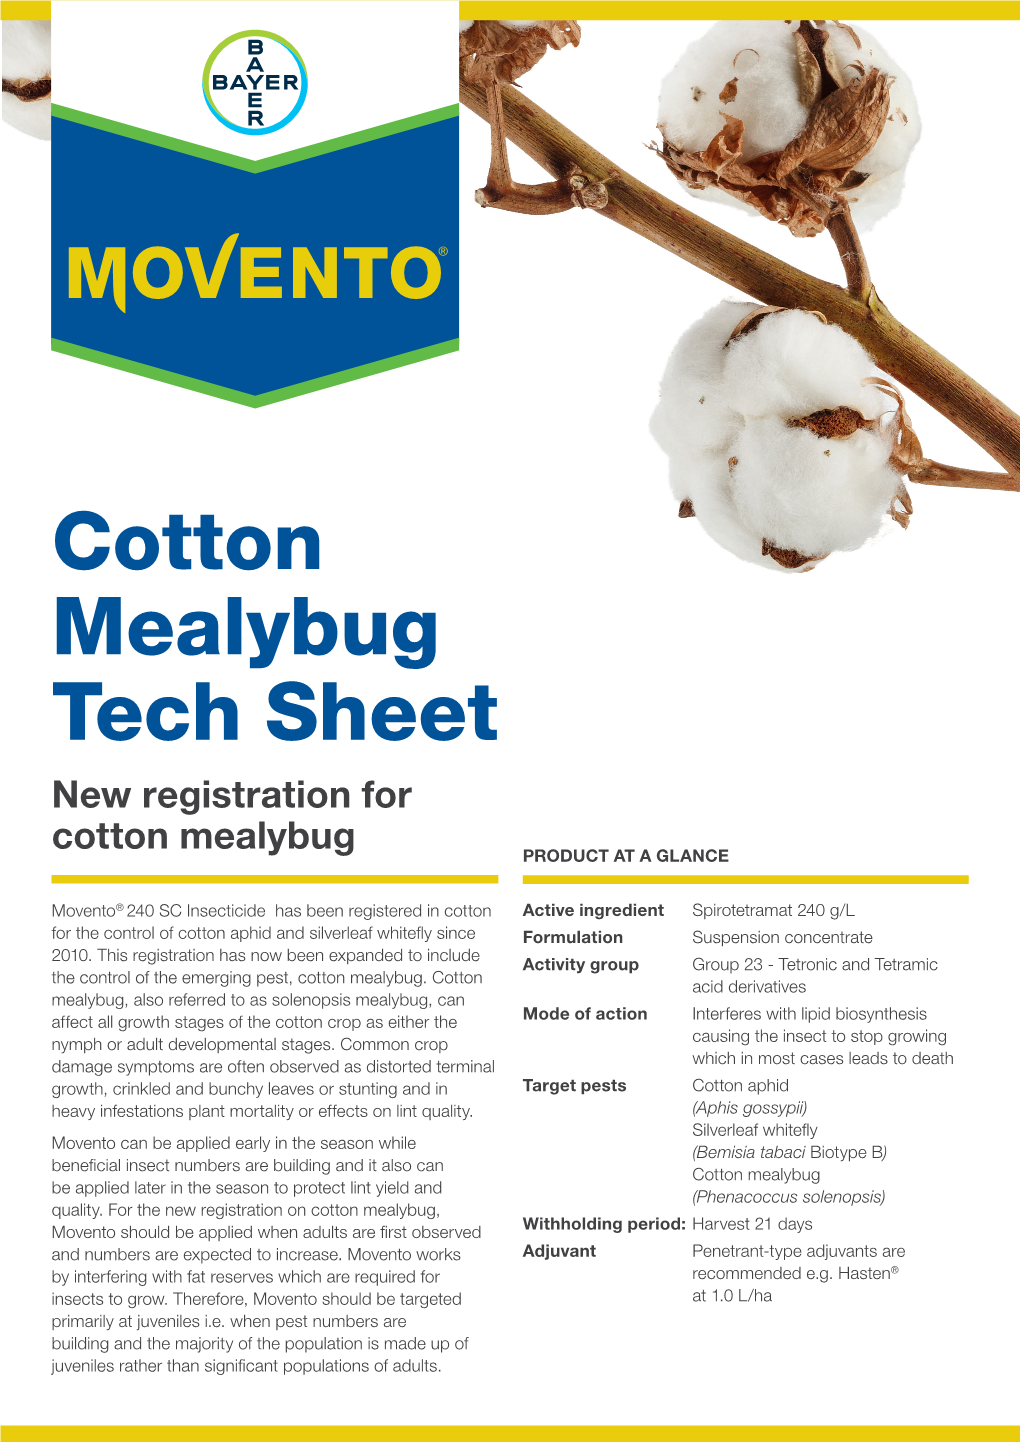 Cotton Mealybug Tech Sheet New Registration for Cotton Mealybug PRODUCT at a GLANCE